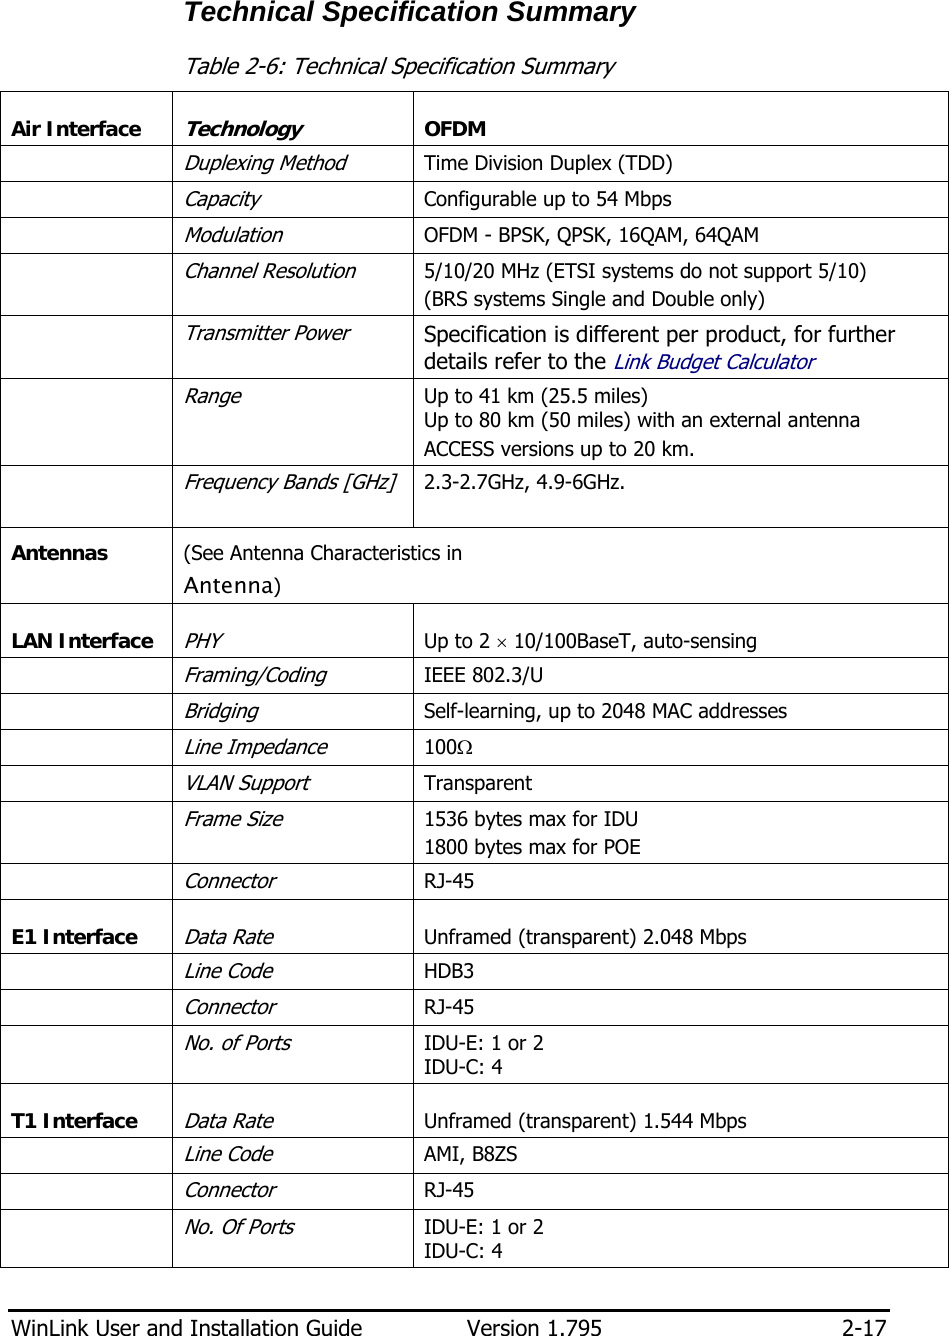  WinLink User and Installation Guide  Version 1.795  2-17  Technical Specification Summary Table  2-6: Technical Specification Summary Air Interface Technology OFDM  Duplexing Method Time Division Duplex (TDD)  Capacity Configurable up to 54 Mbps   Modulation OFDM - BPSK, QPSK, 16QAM, 64QAM  Channel Resolution 5/10/20 MHz (ETSI systems do not support 5/10) (BRS systems Single and Double only)  Transmitter Power Specification is different per product, for further details refer to the Link Budget Calculator  Range Up to 41 km (25.5 miles)  Up to 80 km (50 miles) with an external antenna ACCESS versions up to 20 km.  Frequency Bands [GHz] 2.3-2.7GHz, 4.9-6GHz.  Antennas  (See Antenna Characteristics in  Antenna) LAN Interface PHY Up to 2 × 10/100BaseT, auto-sensing  Framing/Coding IEEE 802.3/U  Bridging Self-learning, up to 2048 MAC addresses  Line Impedance 100Ω  VLAN Support Transparent  Frame Size 1536 bytes max for IDU 1800 bytes max for POE  Connector RJ-45 E1 Interface Data Rate Unframed (transparent) 2.048 Mbps  Line Code HDB3  Connector RJ-45  No. of Ports IDU-E: 1 or 2 IDU-C: 4 T1 Interface Data Rate Unframed (transparent) 1.544 Mbps  Line Code AMI, B8ZS  Connector RJ-45  No. Of Ports IDU-E: 1 or 2 IDU-C: 4 